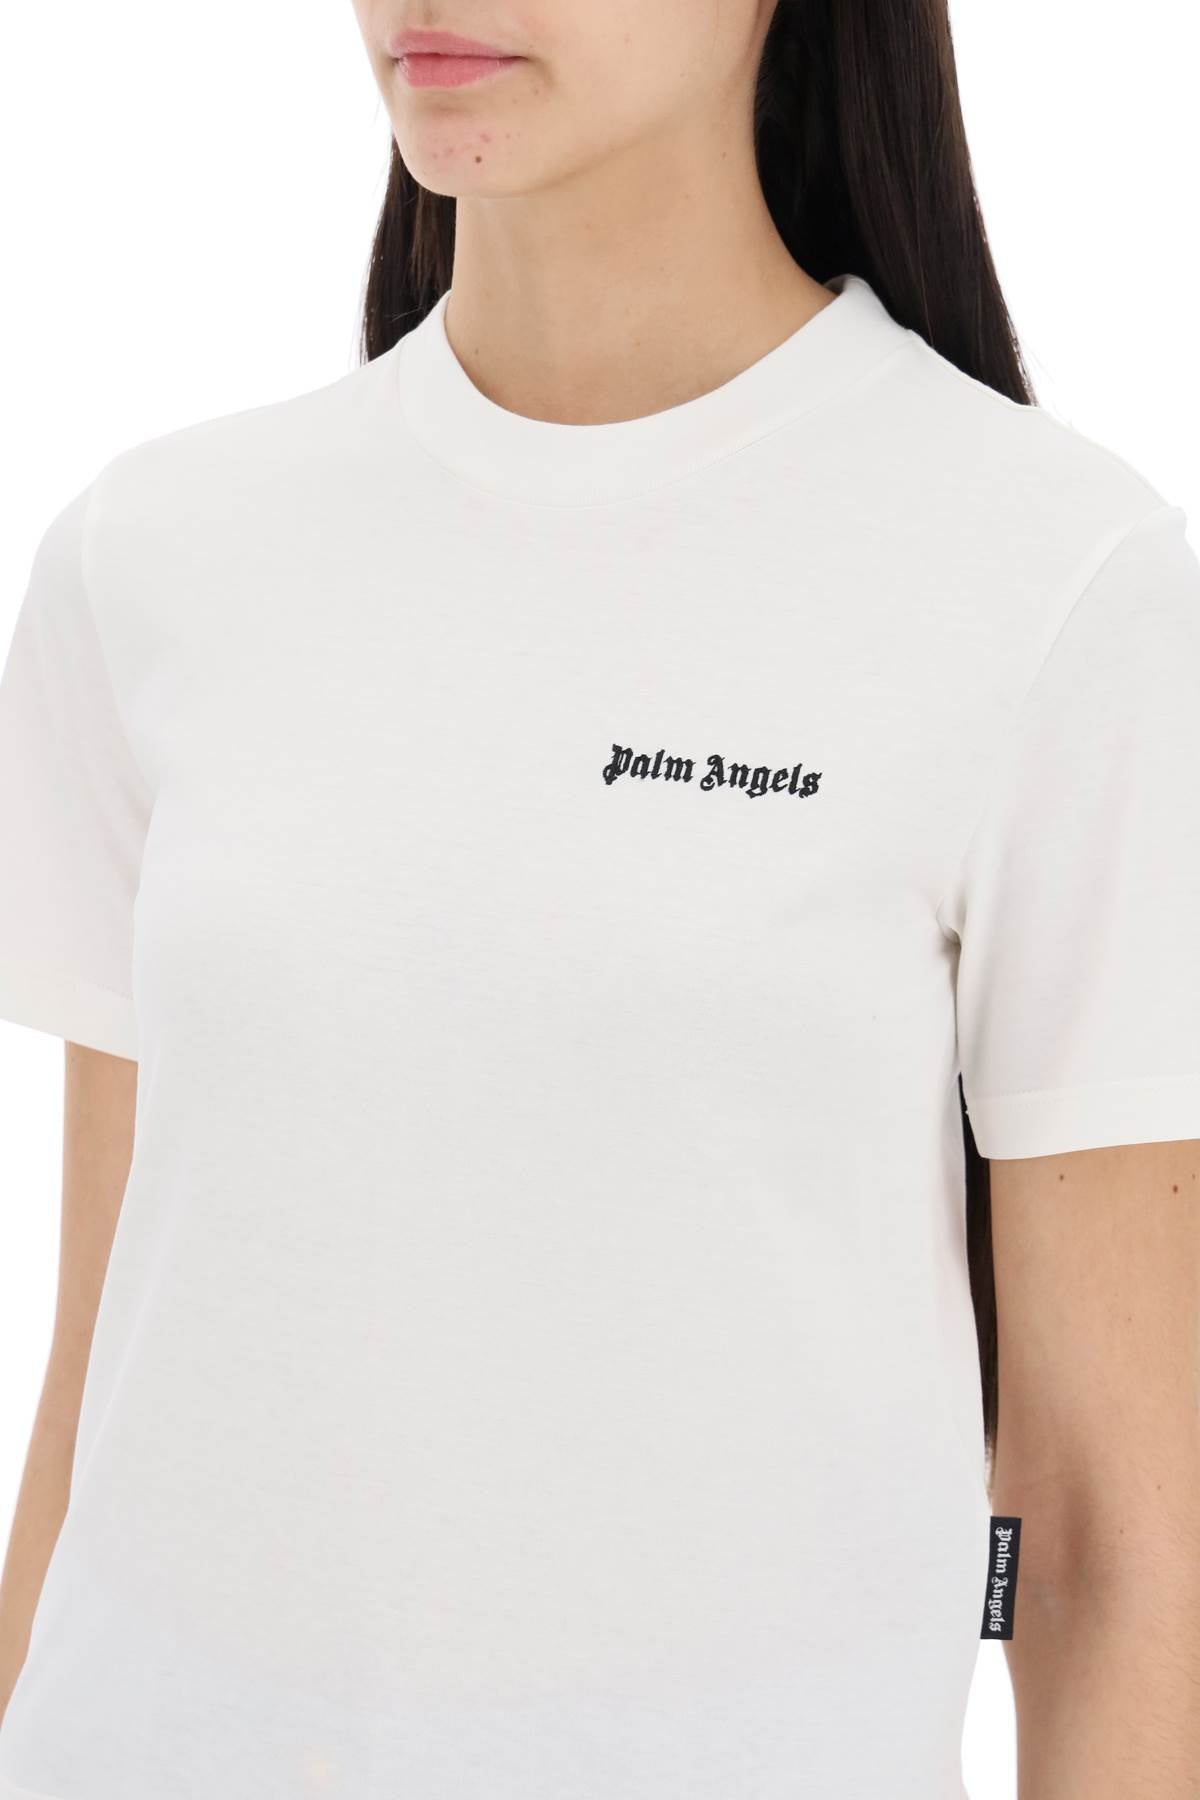 Palm angels "round-neck t-shirt with embroidered-3